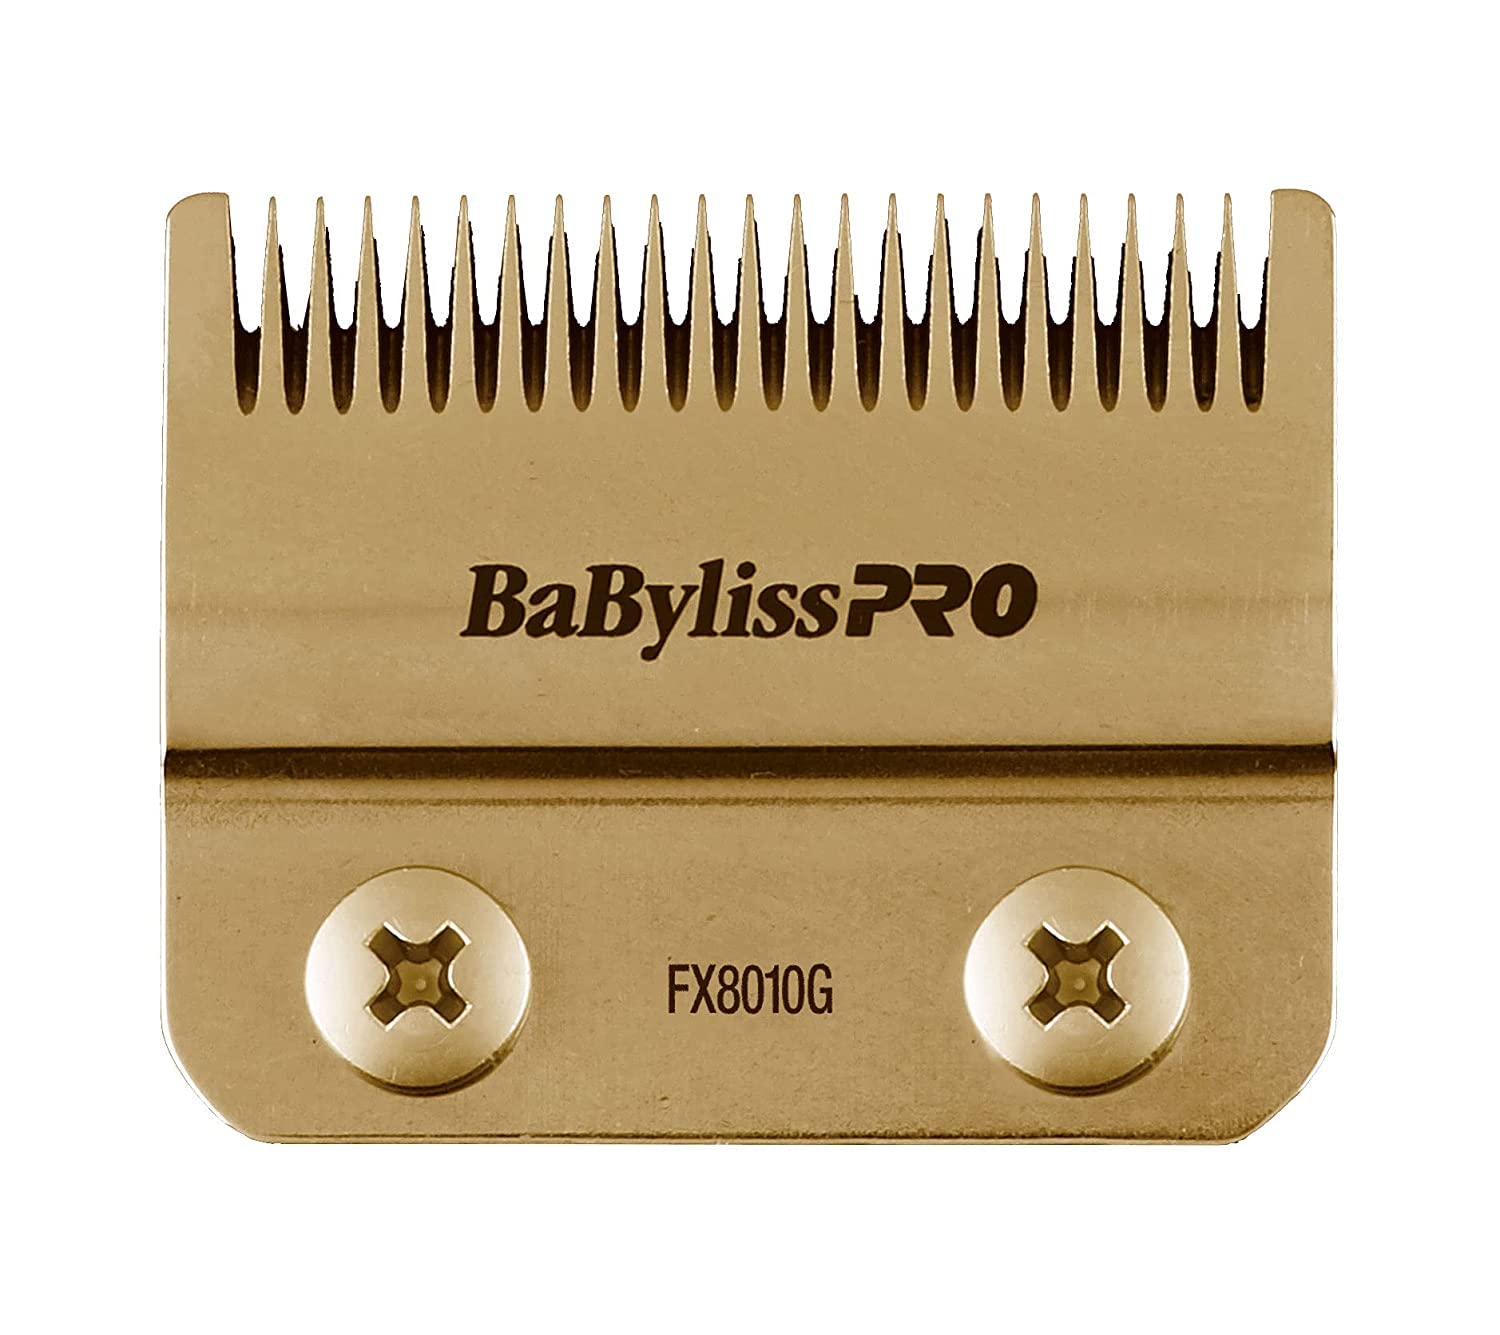 BaBylissPRO Replacement Fade Clipper Blades for FX870, FX825, FX673 Clippers and most 2-hole blade systems